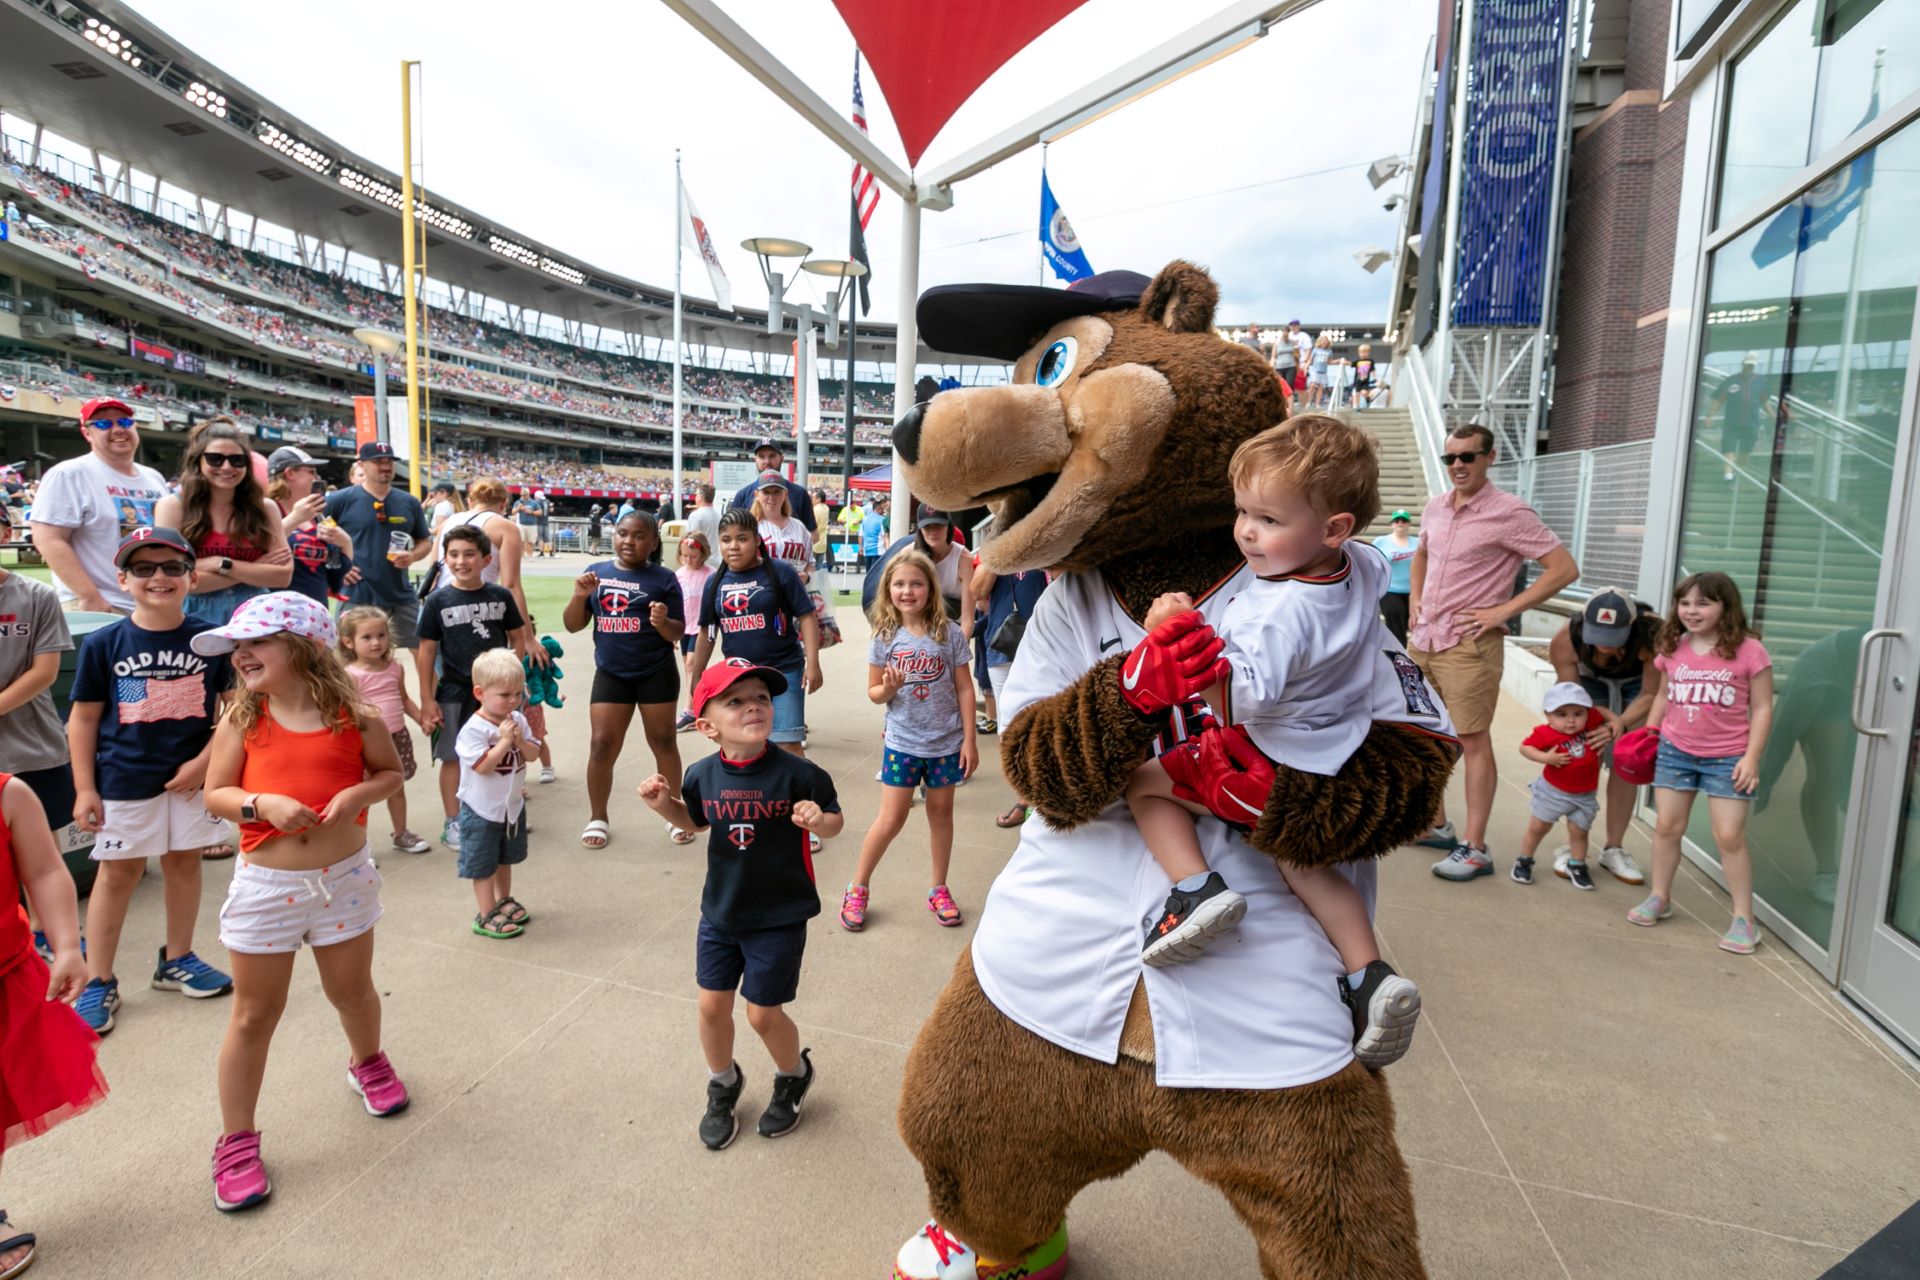 TODDLER boy with tc bear at target field part of Minnesota Twins Family Guide